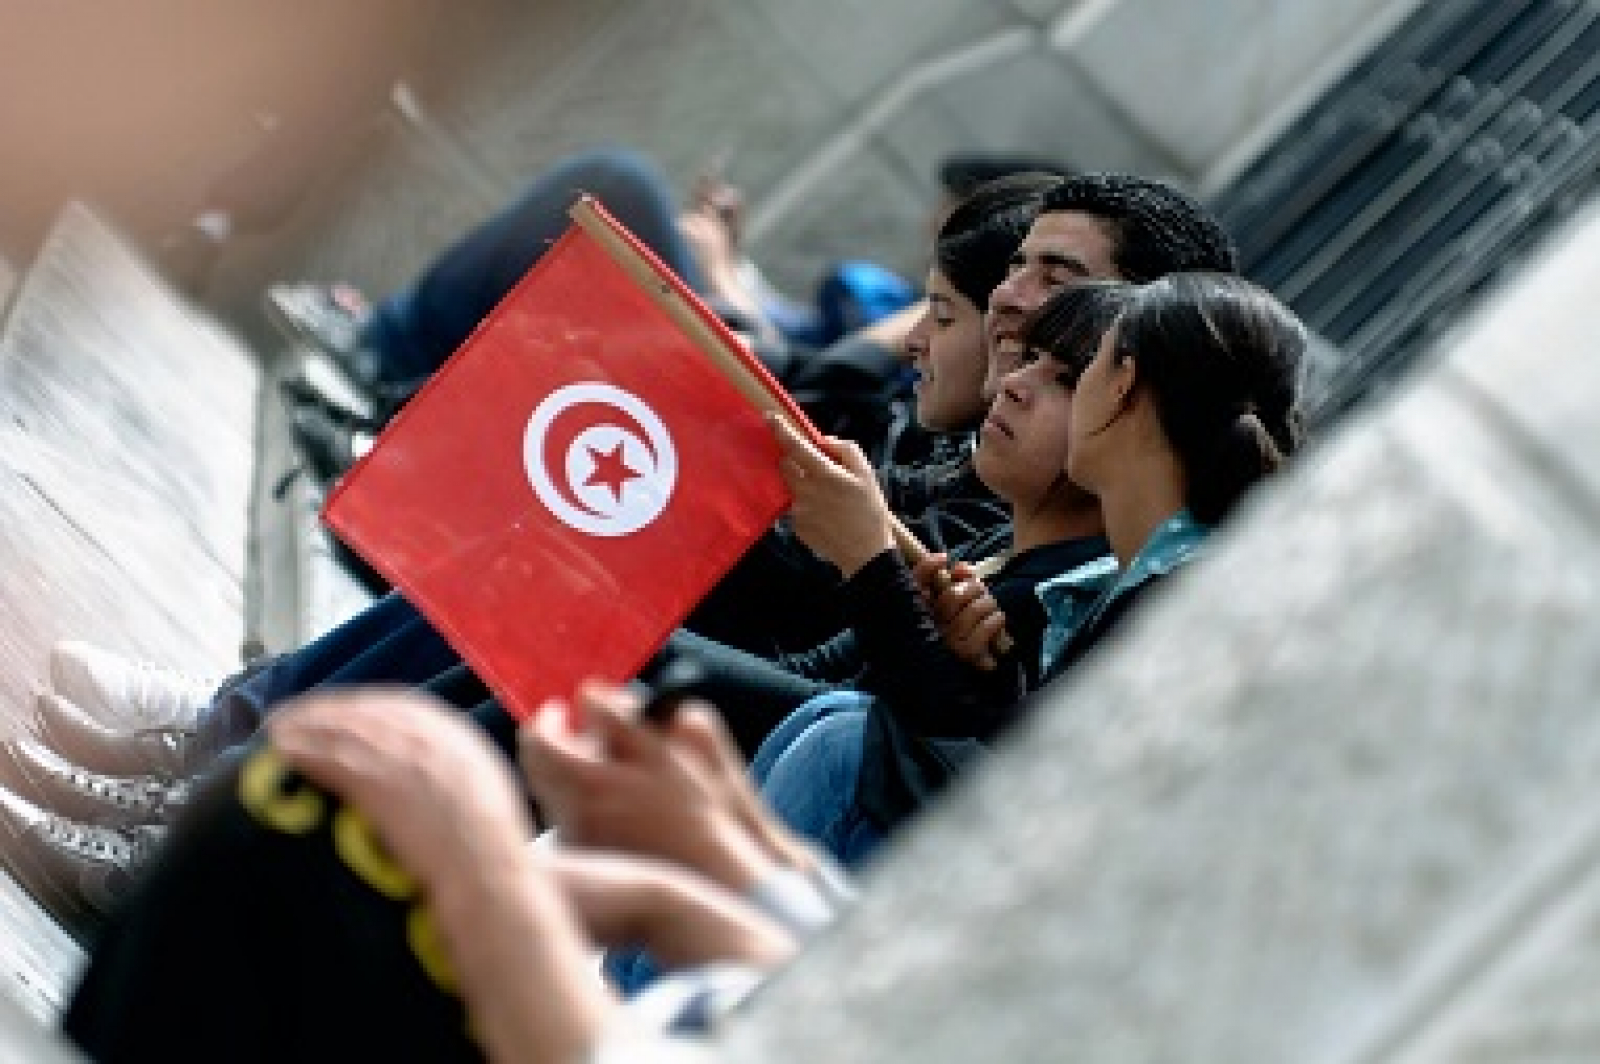 Tunisians Seek Real Dialogue, Greater Involvement in Final Stages of Political Transition